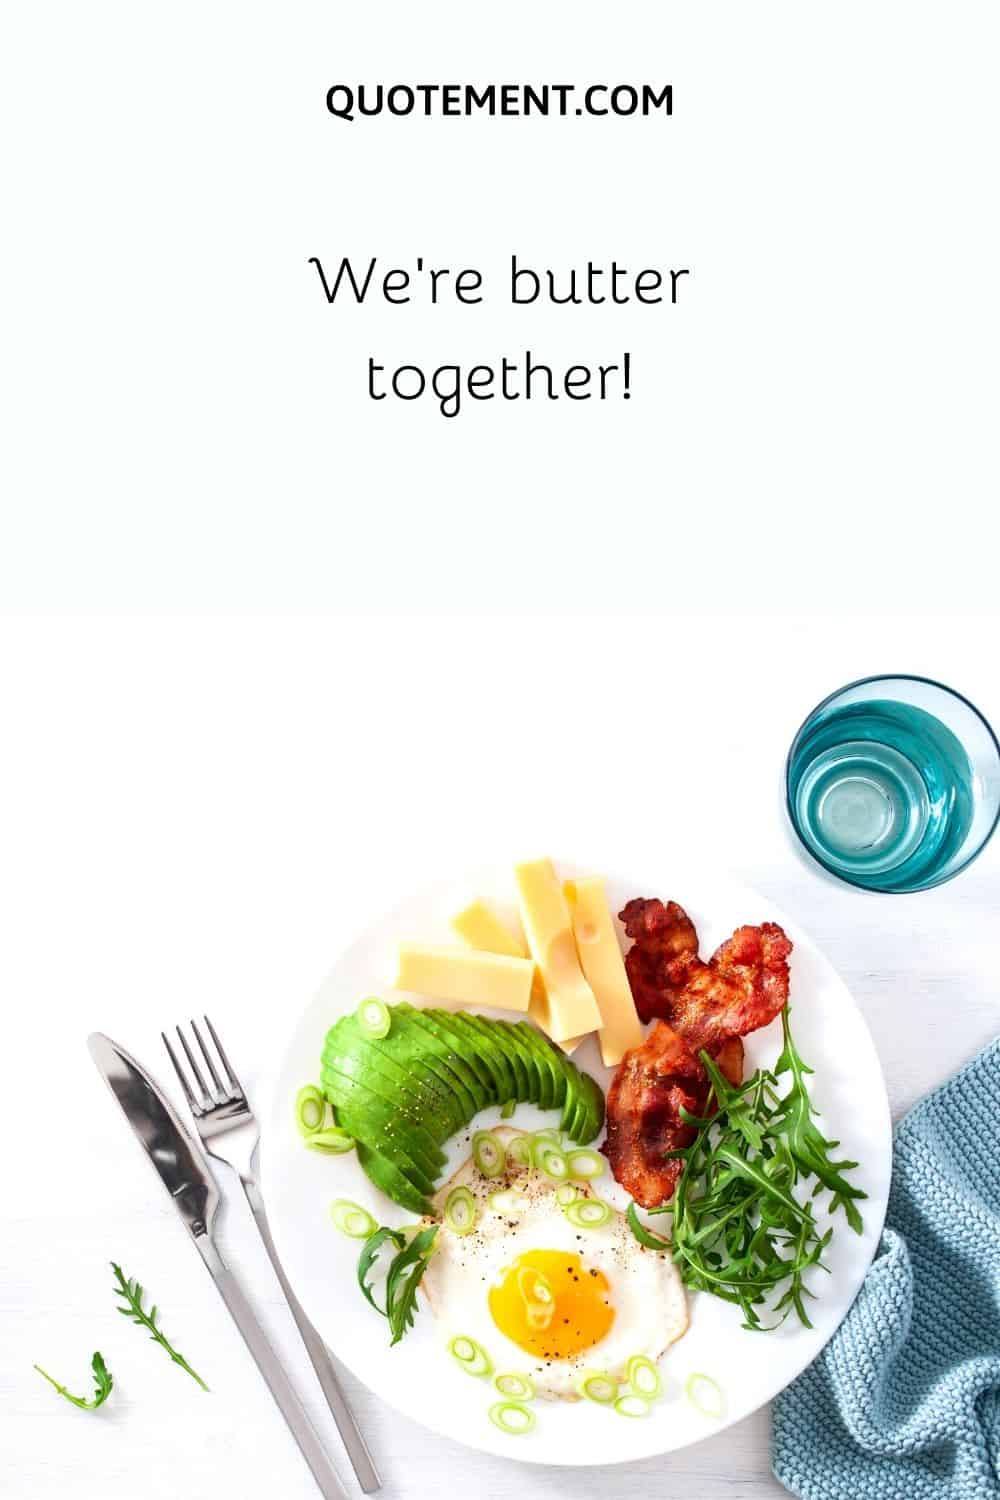 We’re butter together!